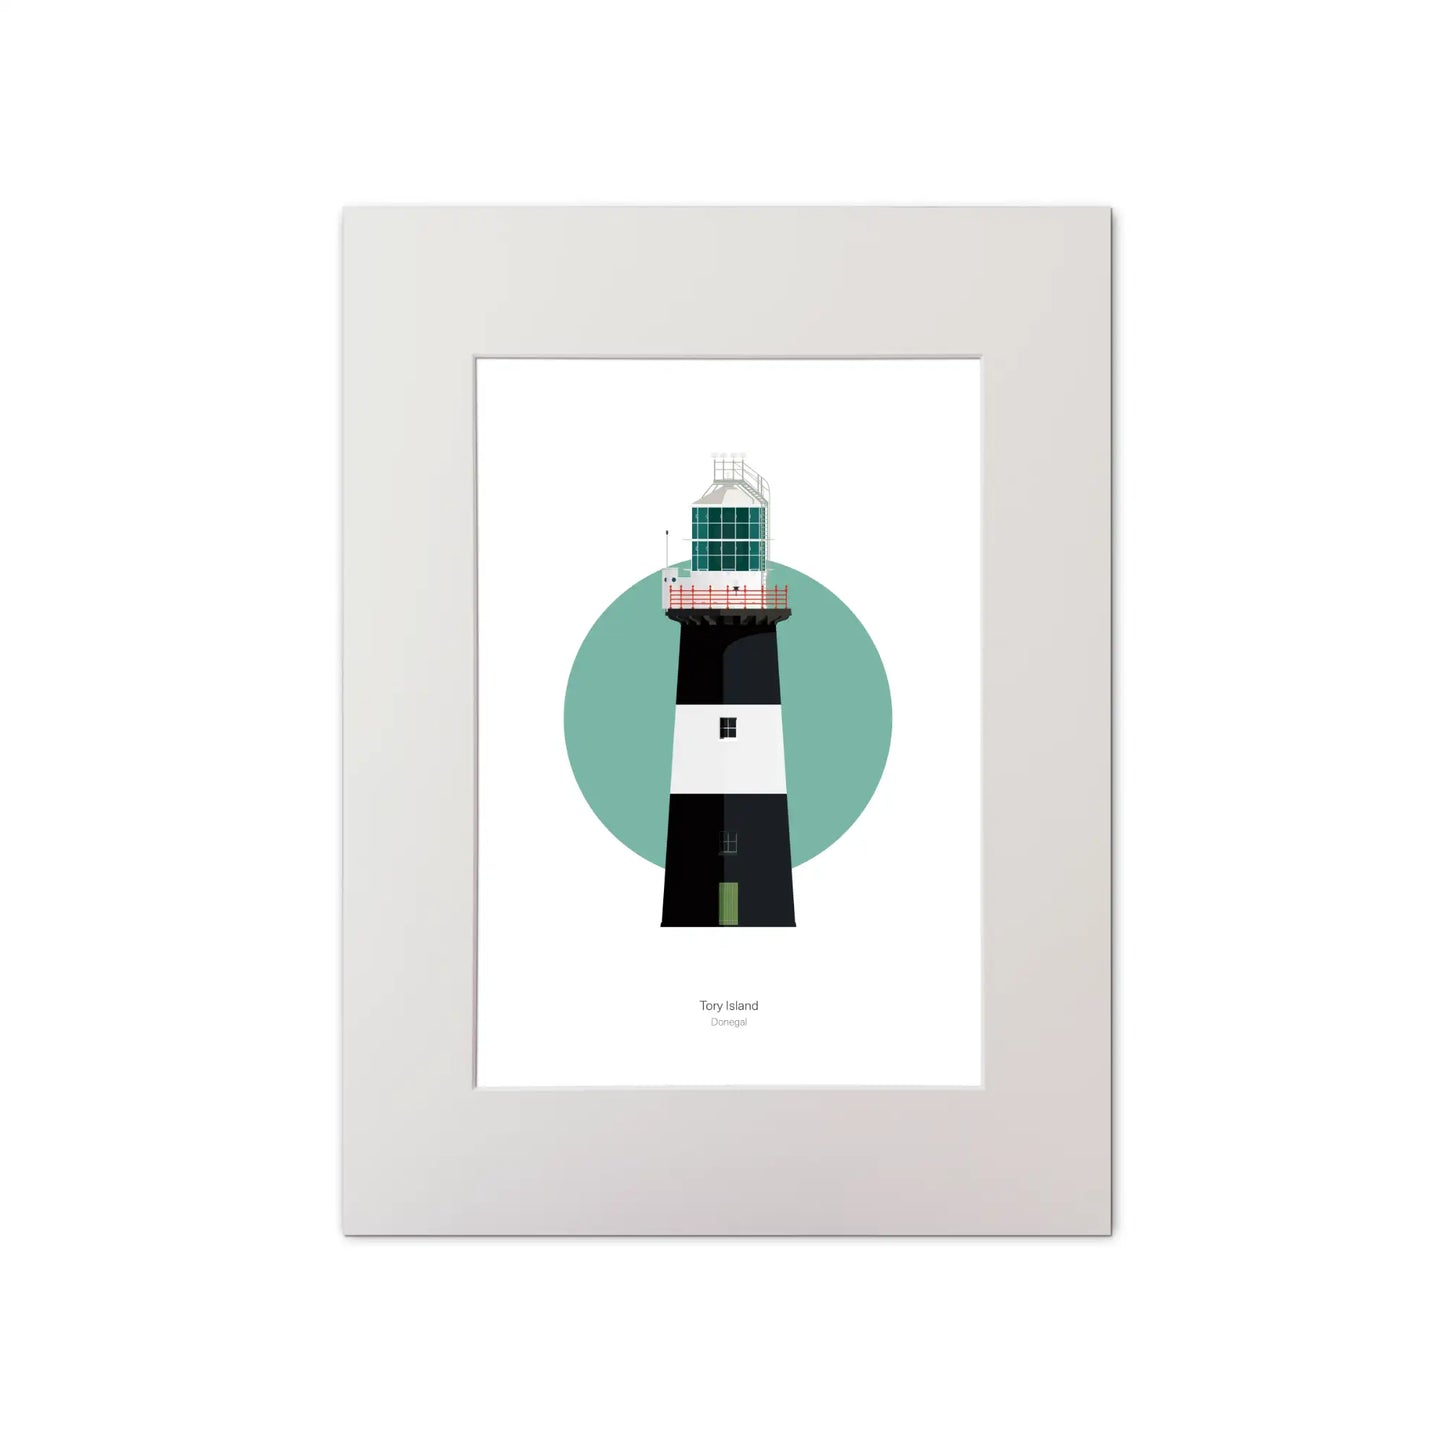 Illustration of Tory Island lighthouse on a white background inside light blue square, mounted and measuring 30x40cm.